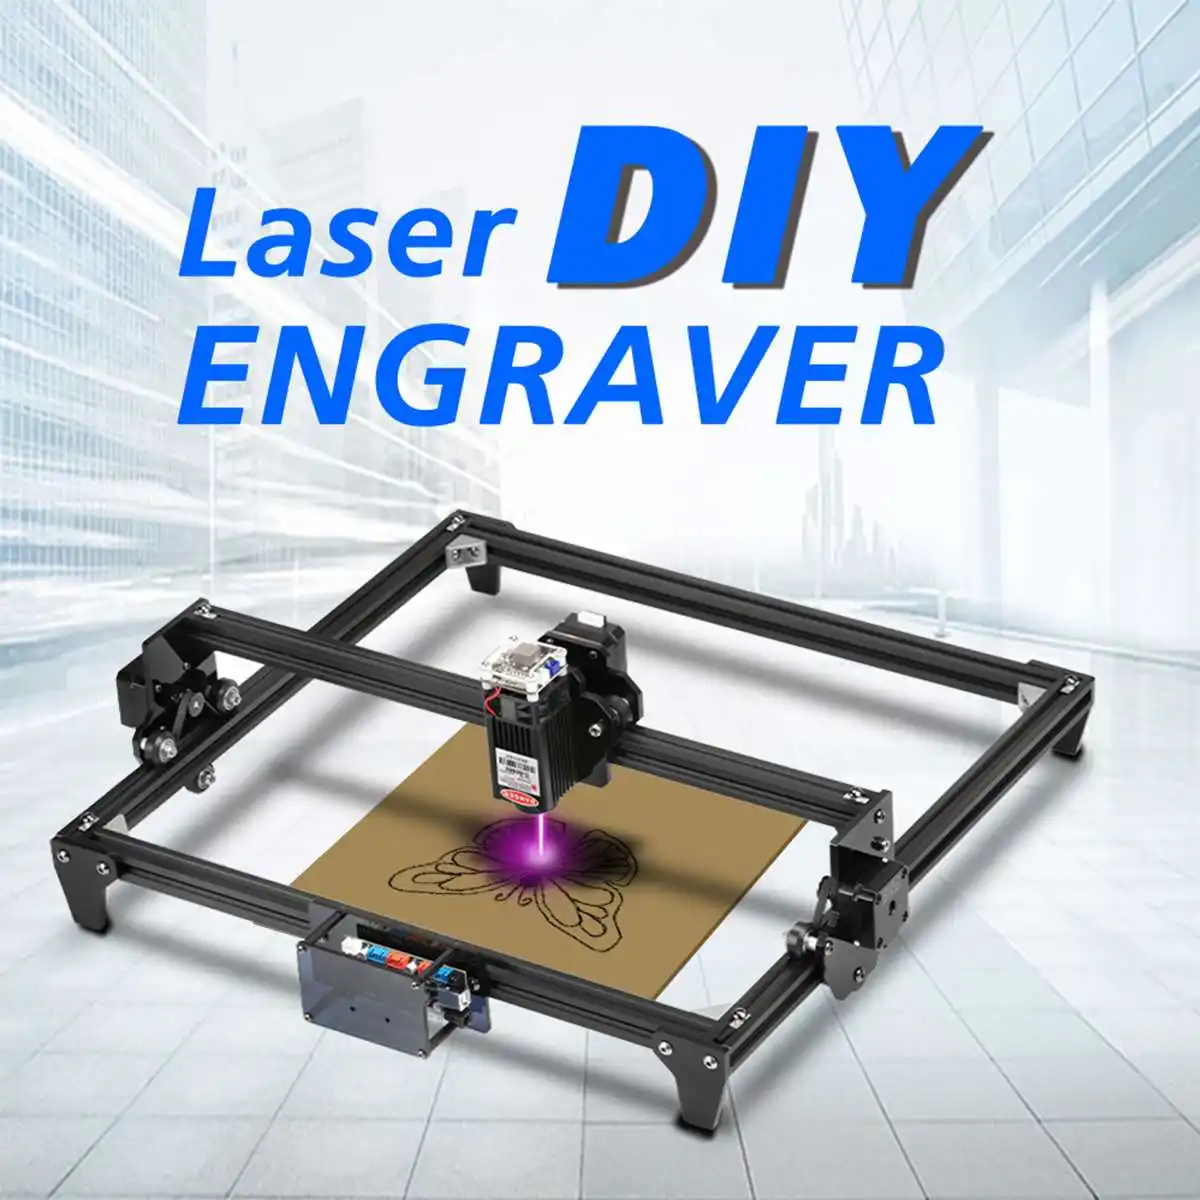 

2500mW/5500mW Laser Engraver 7.5W/20W Cnc Router TT-2.5/TT-5.5 Laser Engraving Cutting Machine For Wood/Leather/Metal/Acrylic